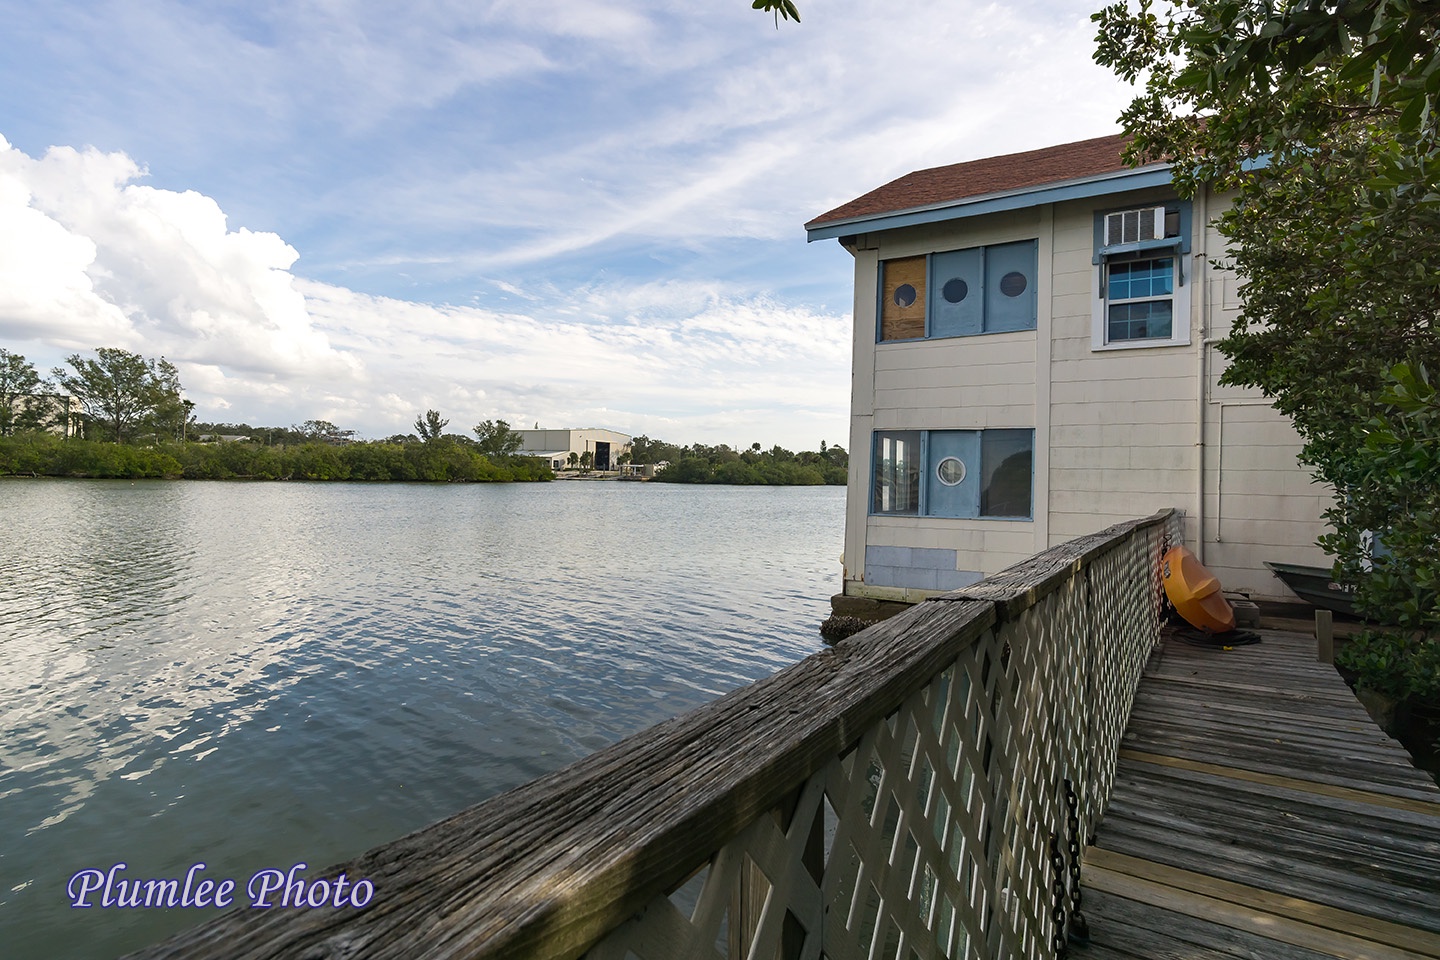 Looking south at The Historic Boathouse from the Dock.